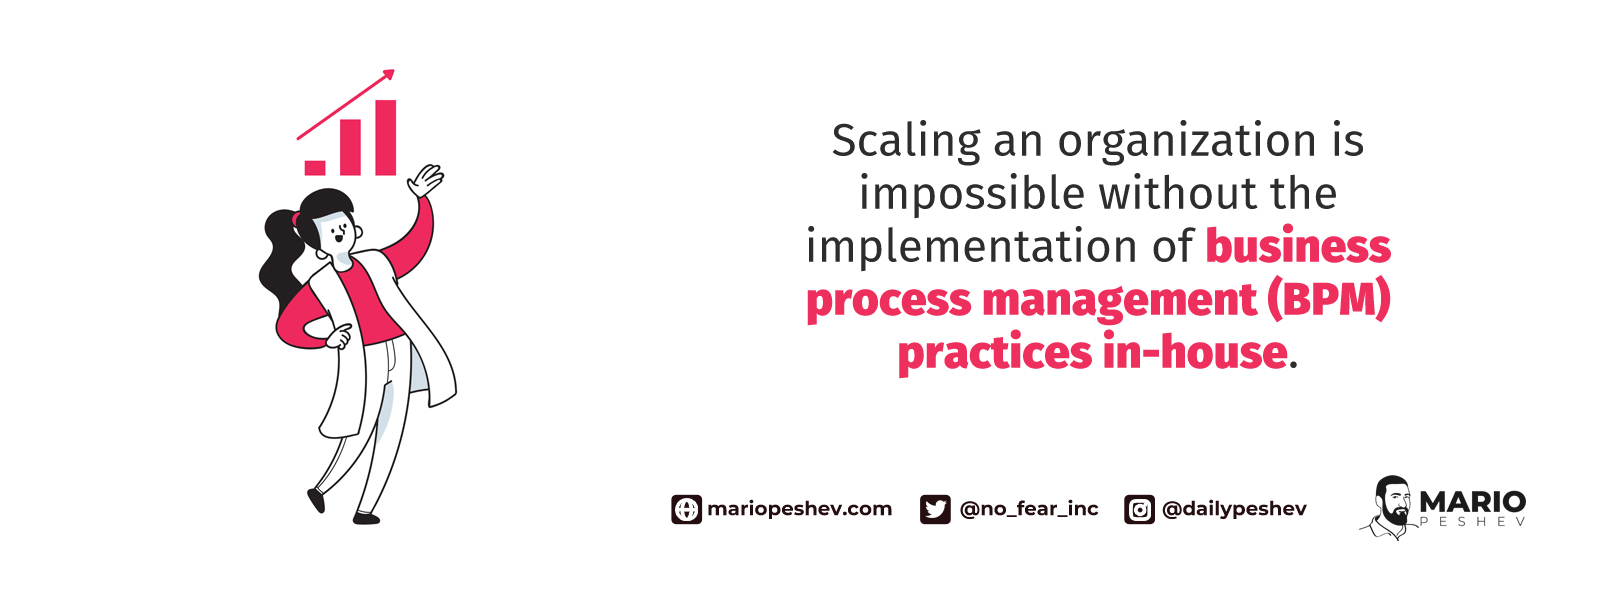 scaling an organization with BPM